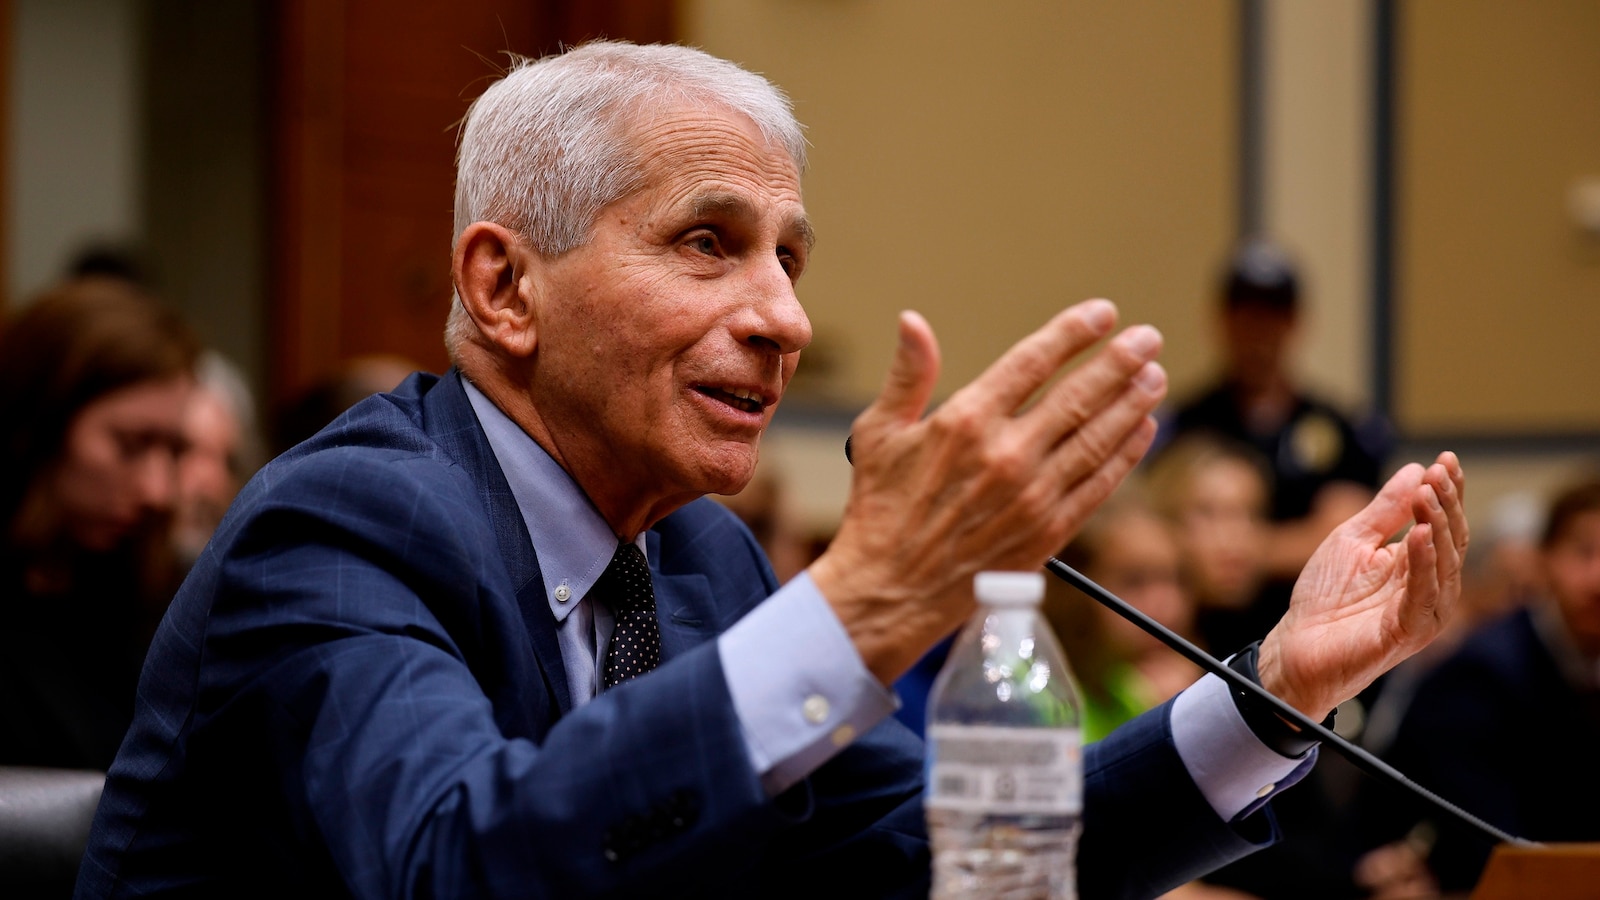 Fauci on why he never quit during Trump administration